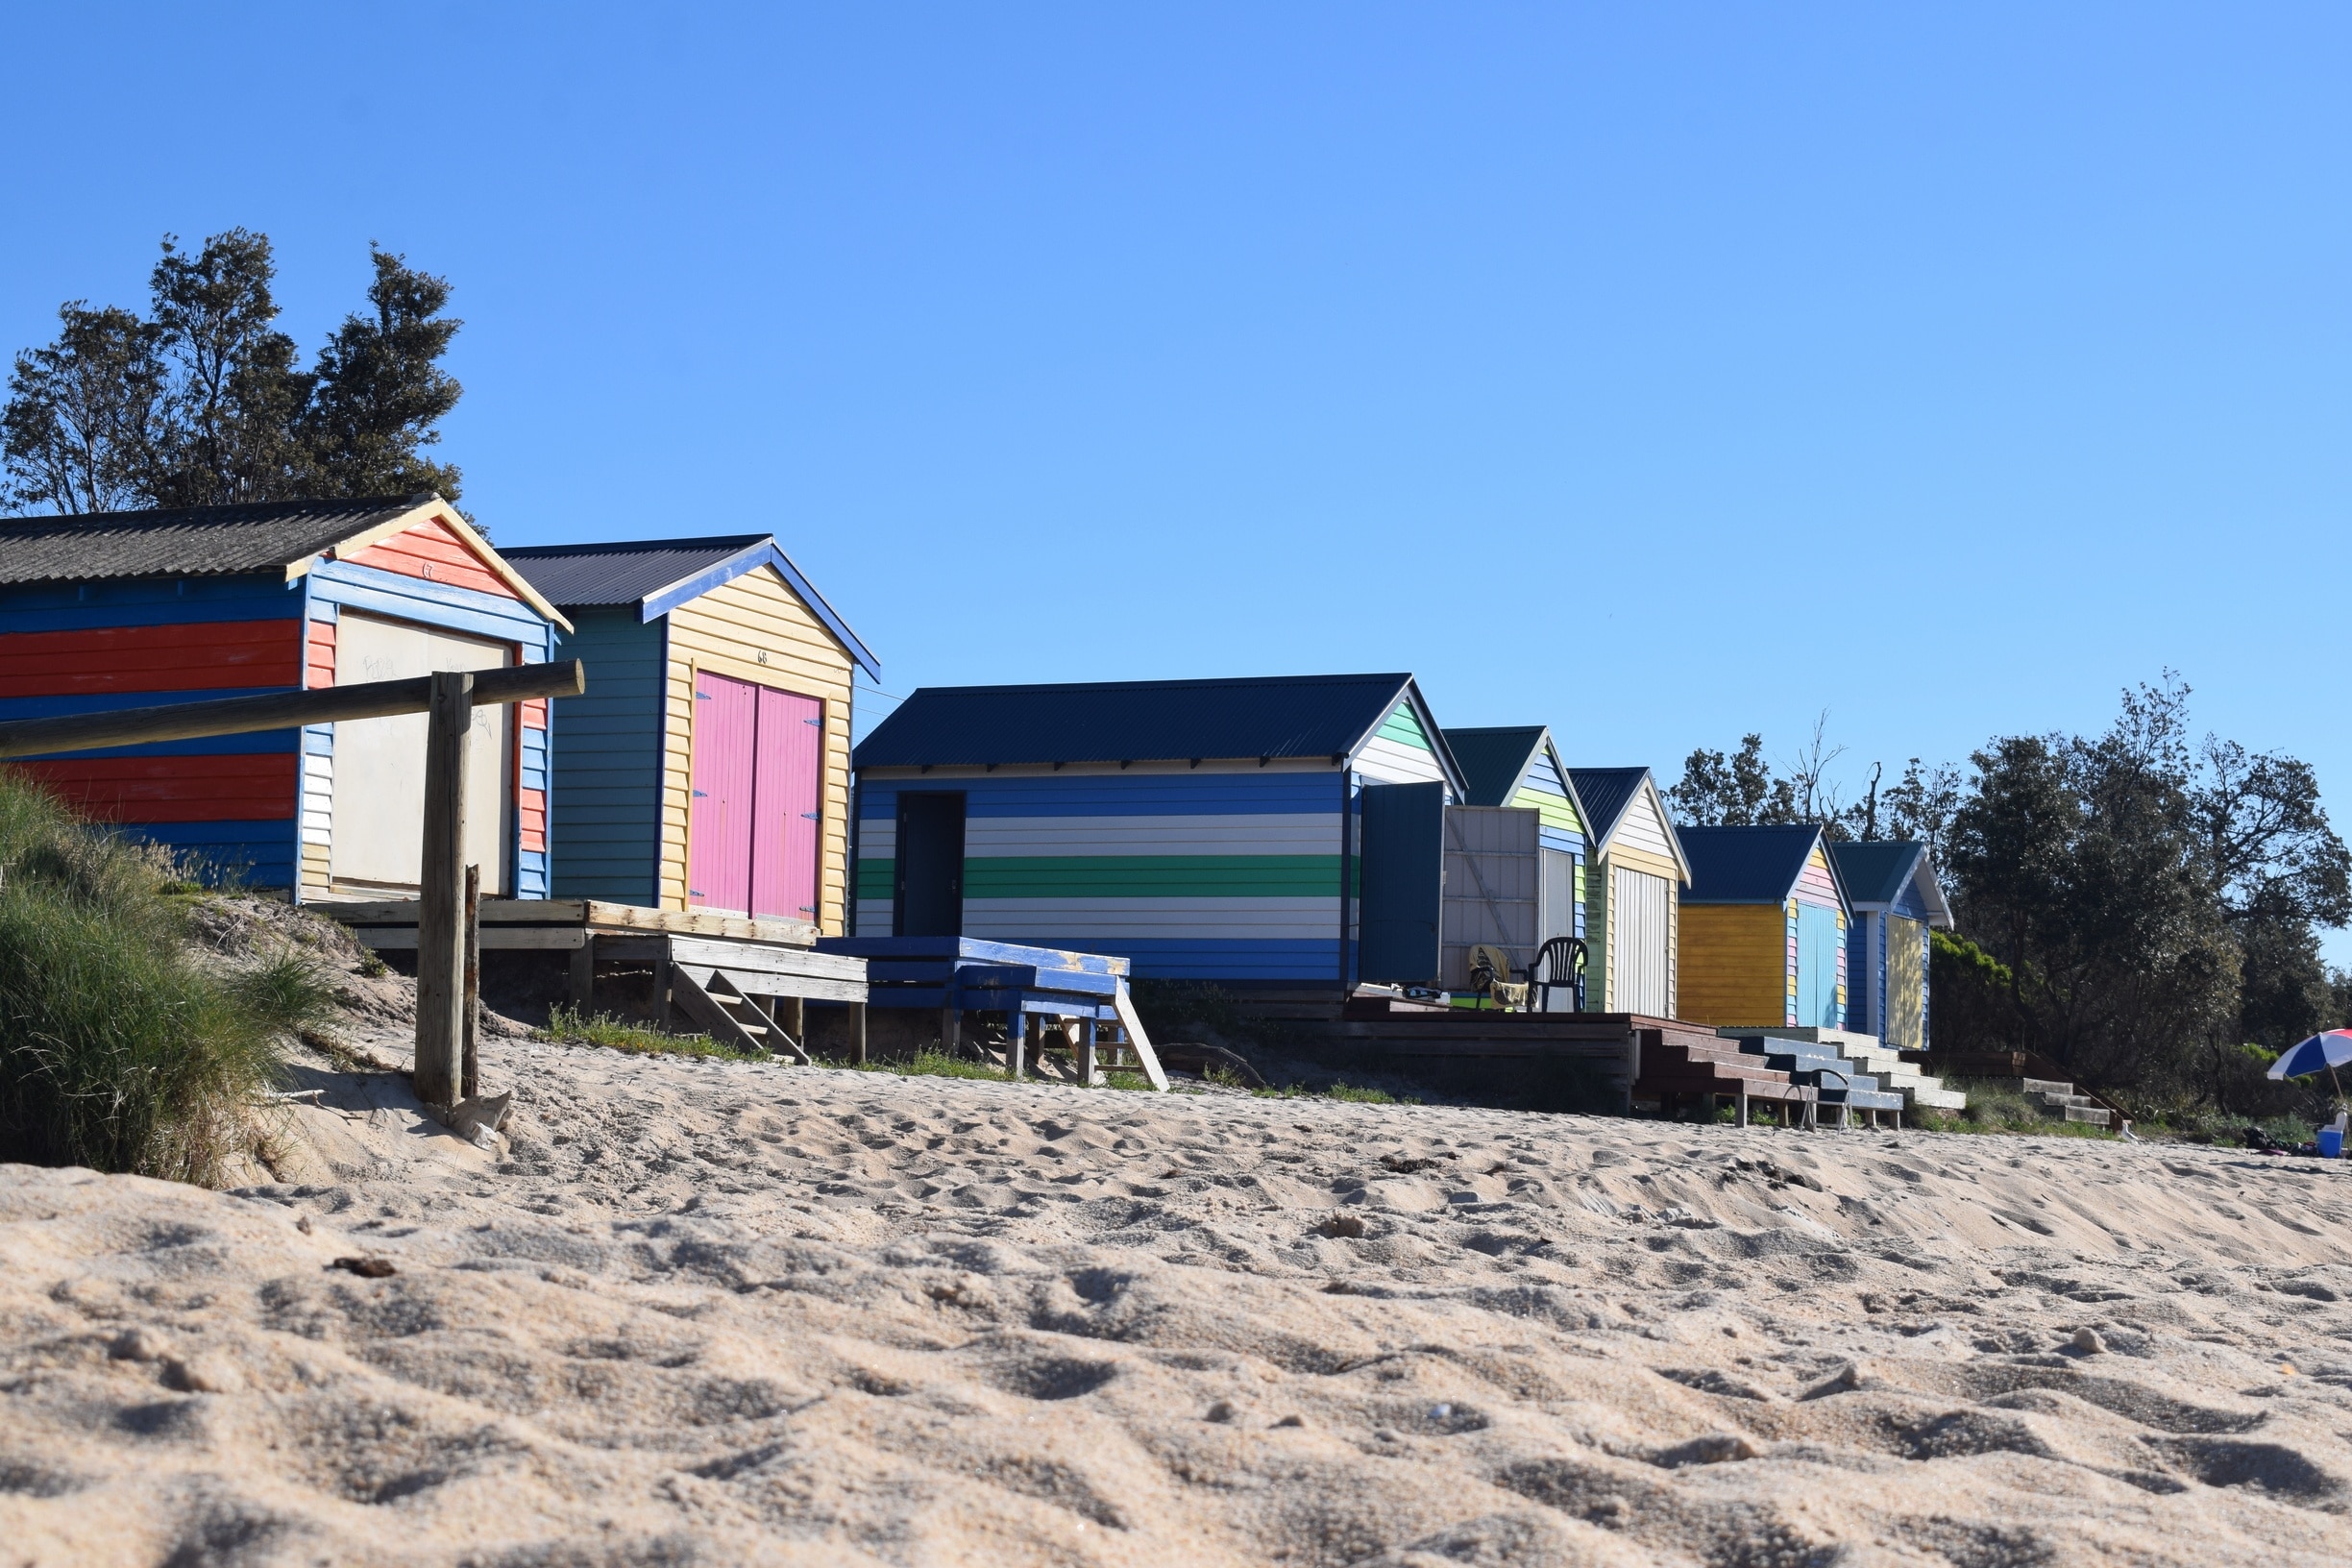 I recently fell in love with the colourful iconic boat sheds of the Mornington Peninsula of Melbourne, Australia.

Brightly painted boat sheds line nearly every beach South of Melbourne. It's rare to see the same design or pattern twice.

#beach #australia #melbourne #beachhut #troveon